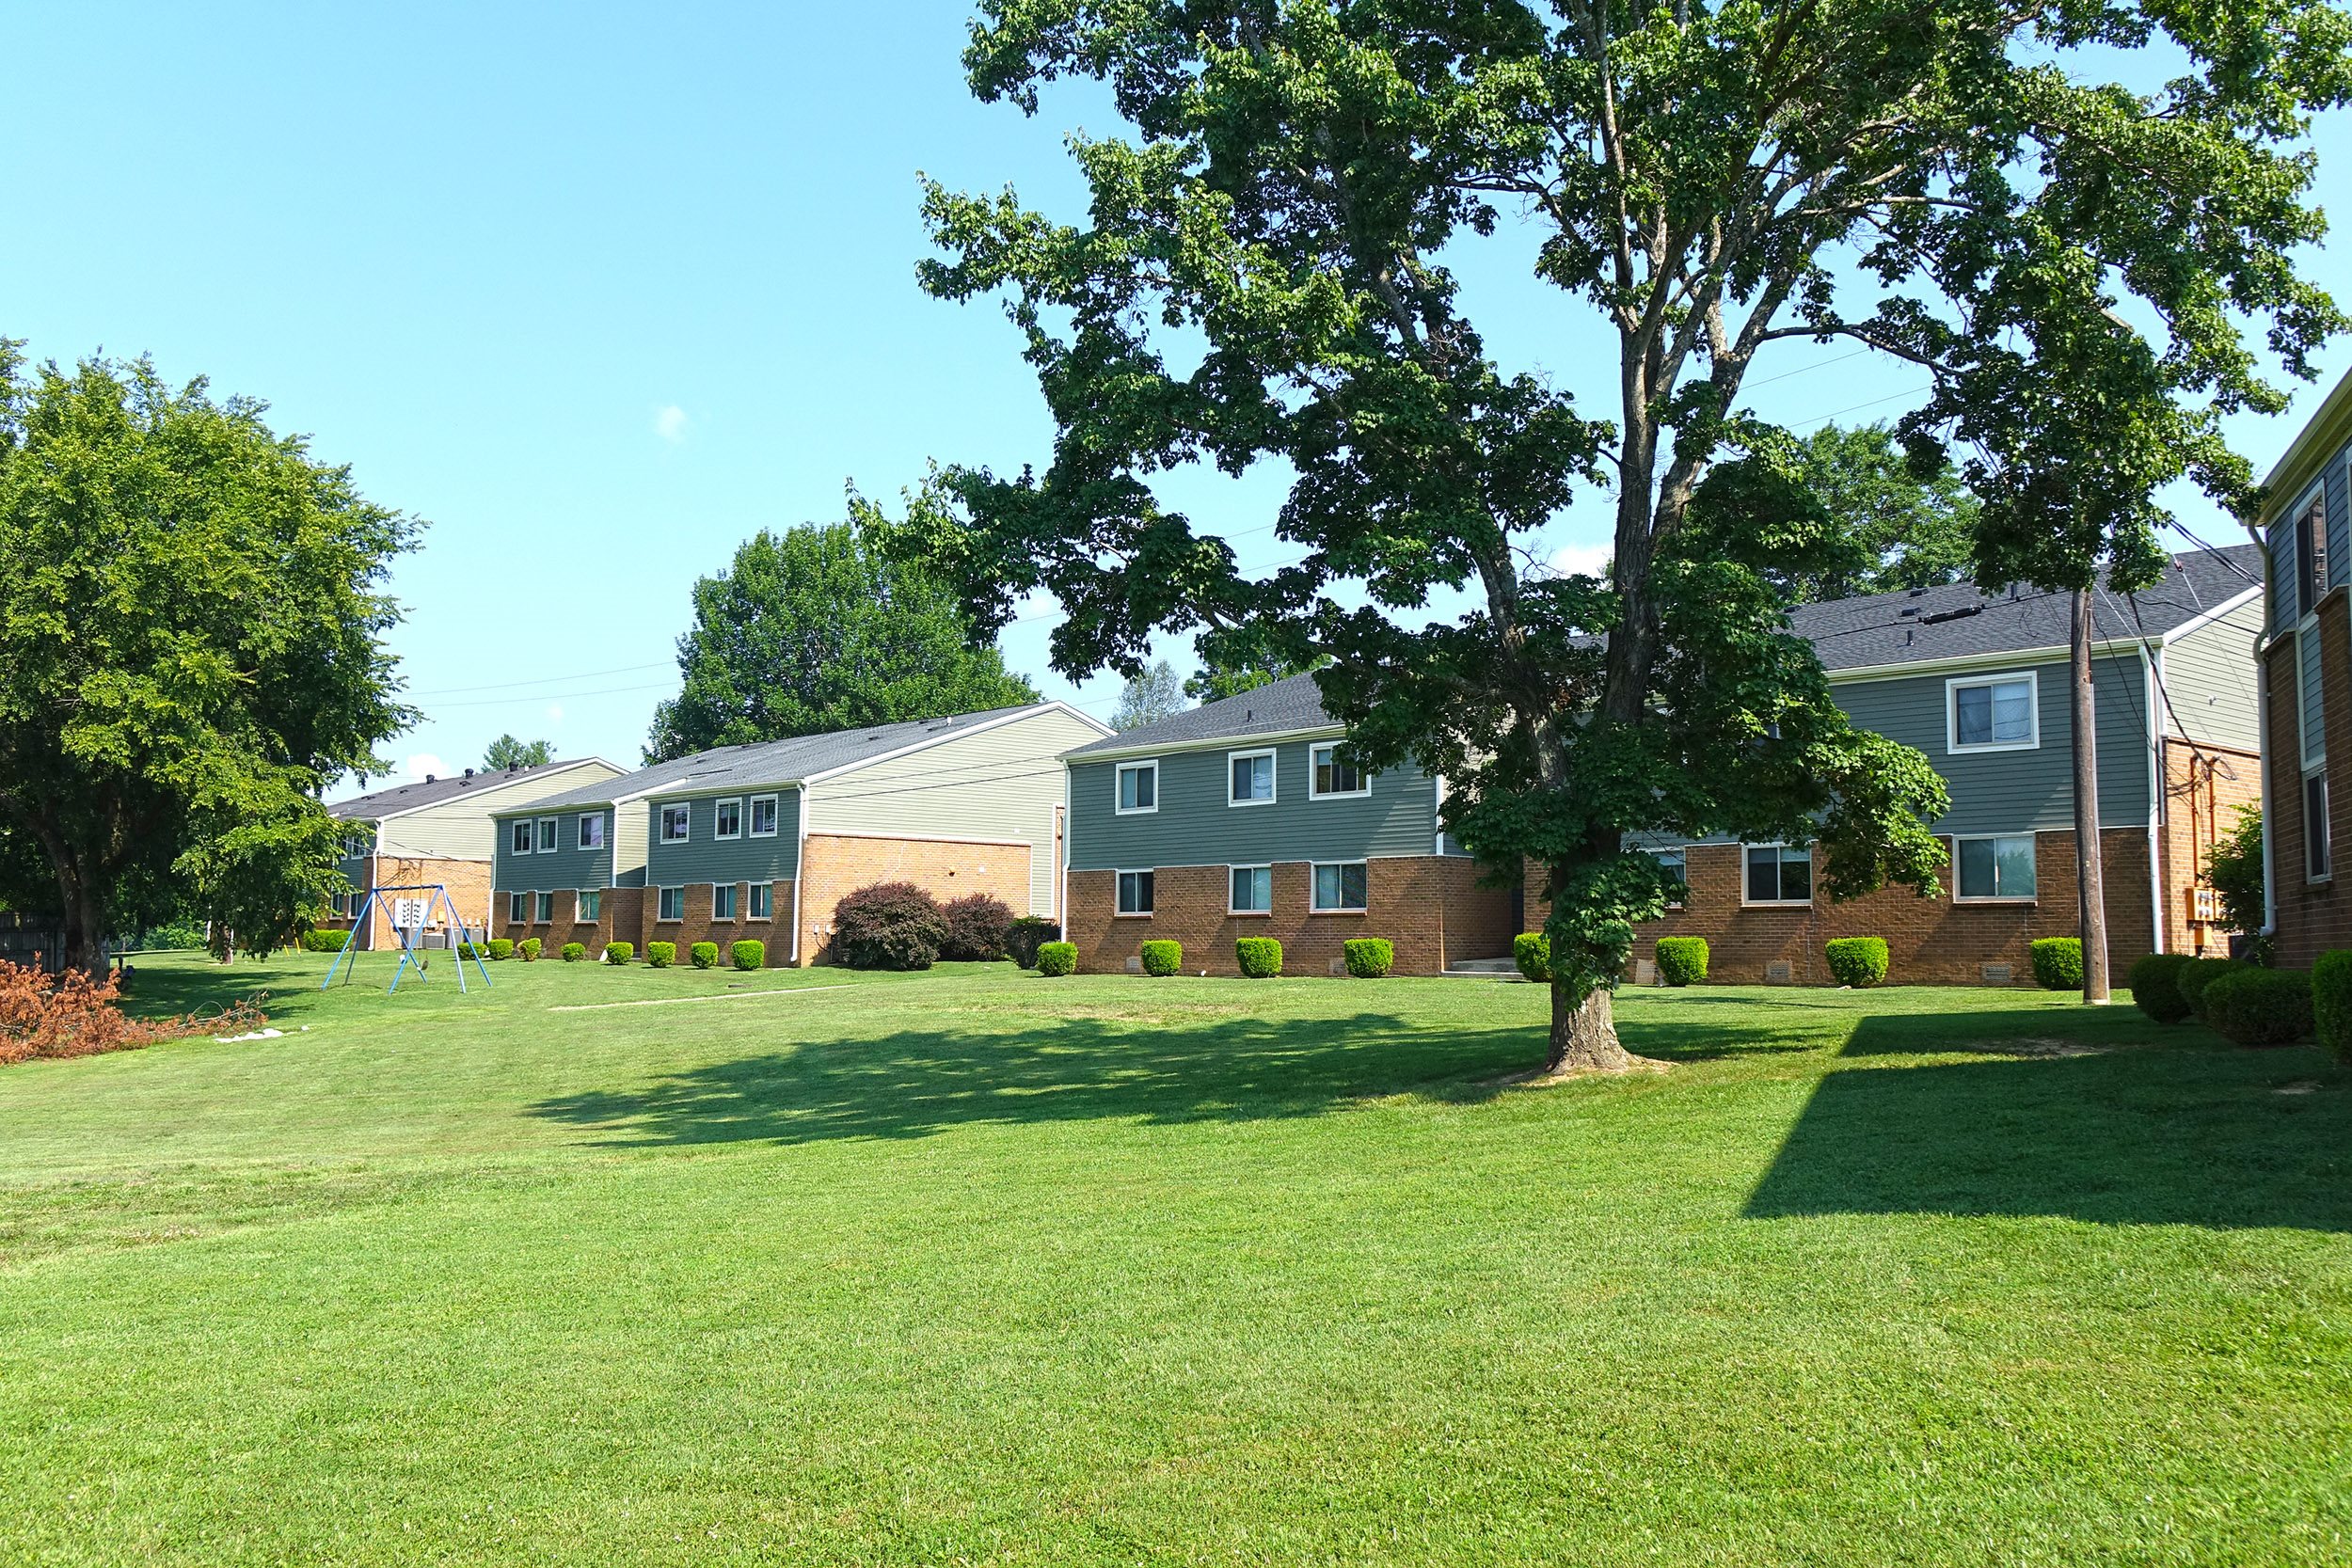 COUNTRY PLACE APARTMENTS